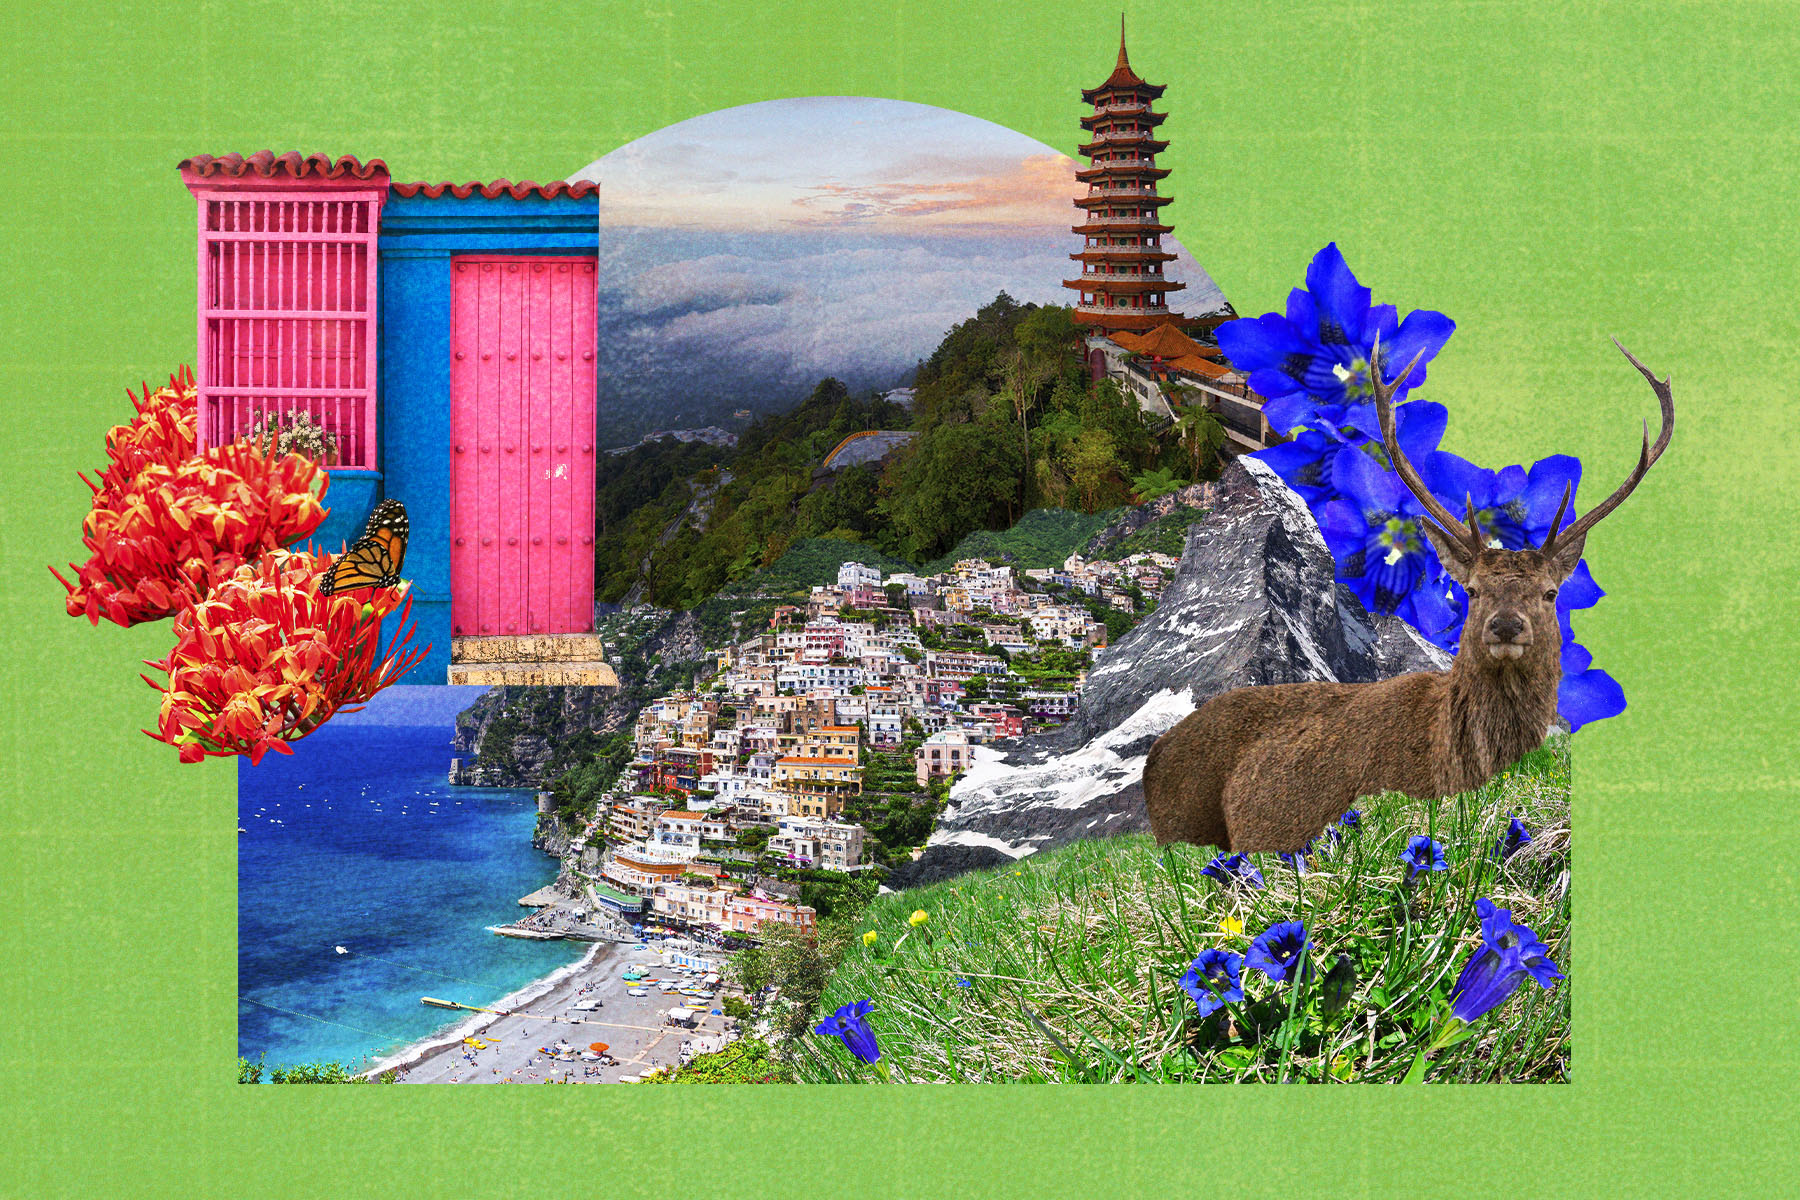 A colourful photo collage of scenes from Malaysia, the French Riviera and more, all set against a green background.